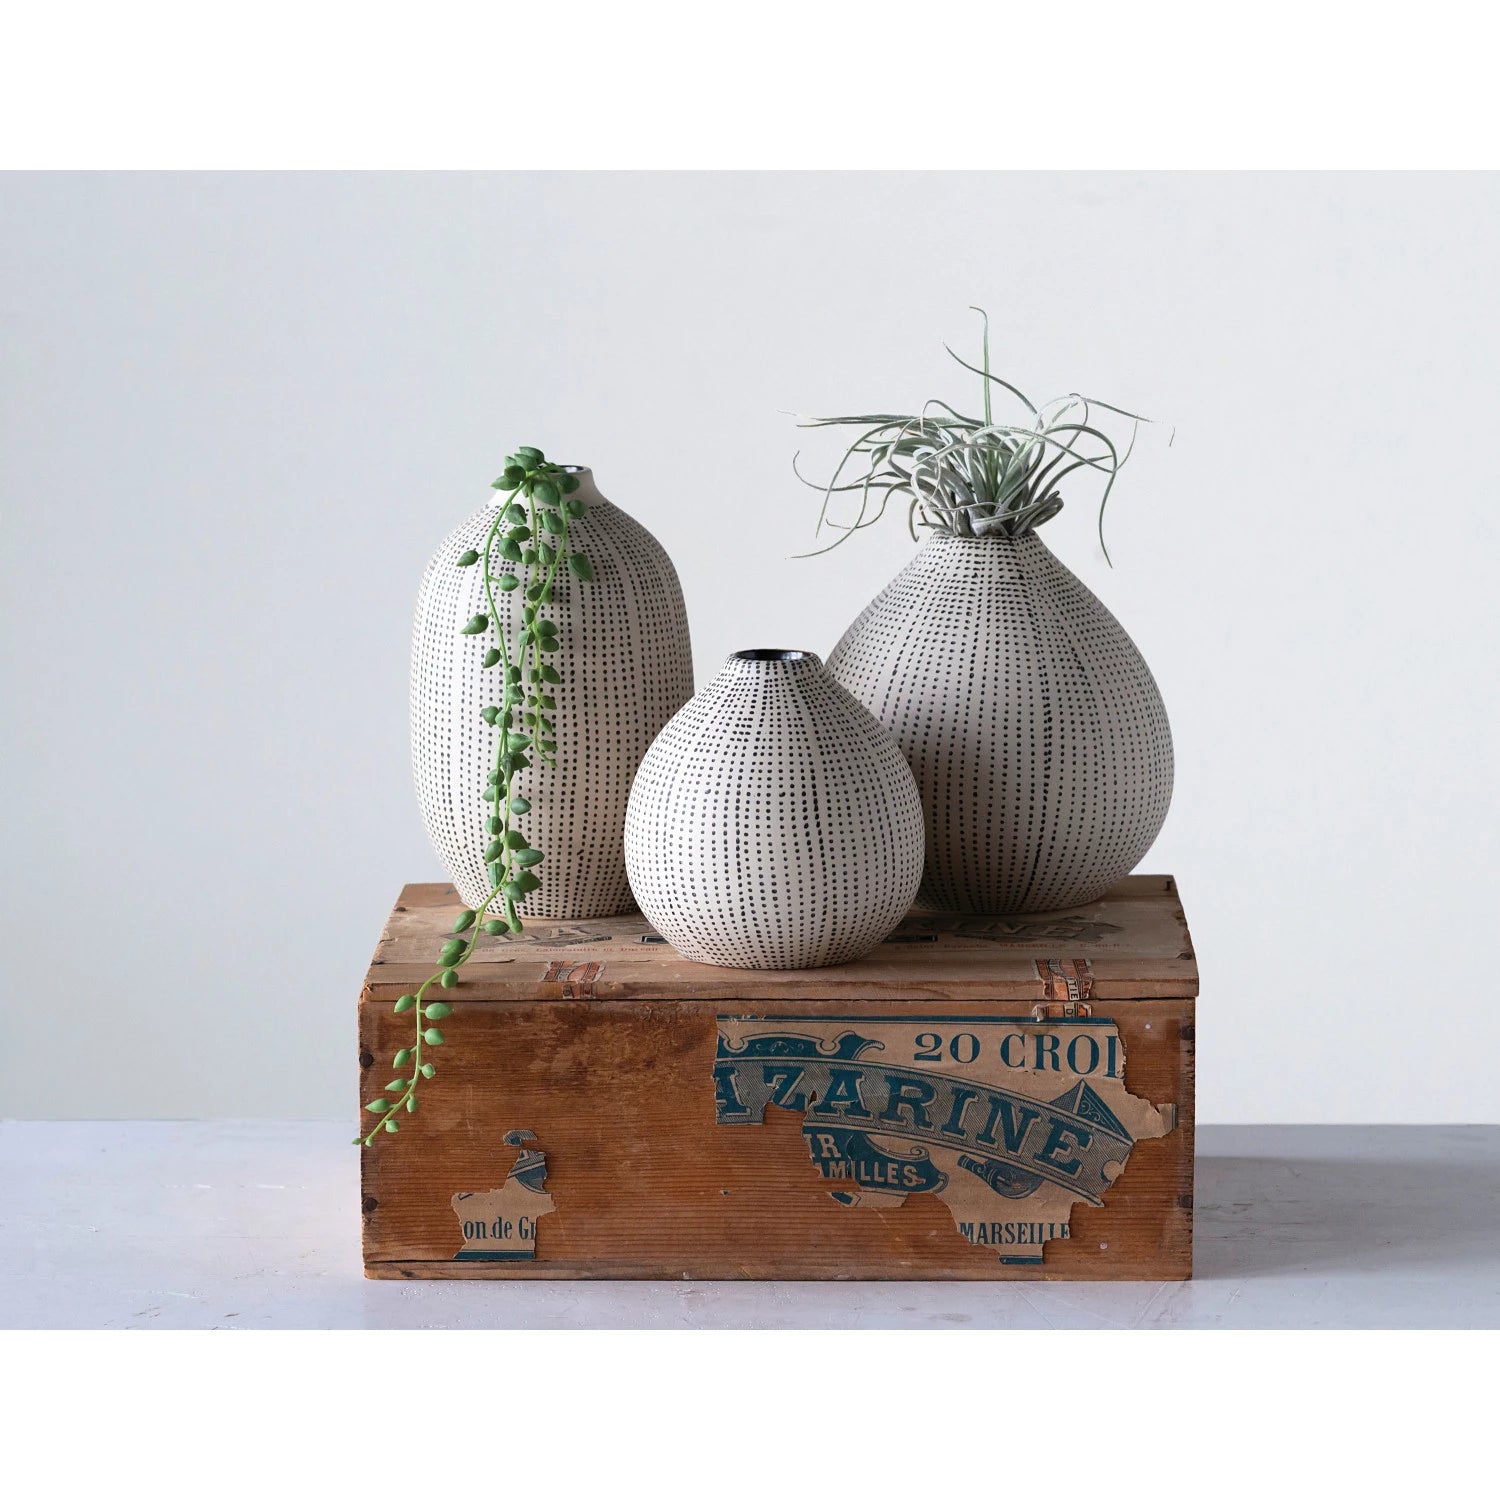 coordinating set of 3 neutral tone textured stoneware vases. Filled with faux stems on top of a rustic box.